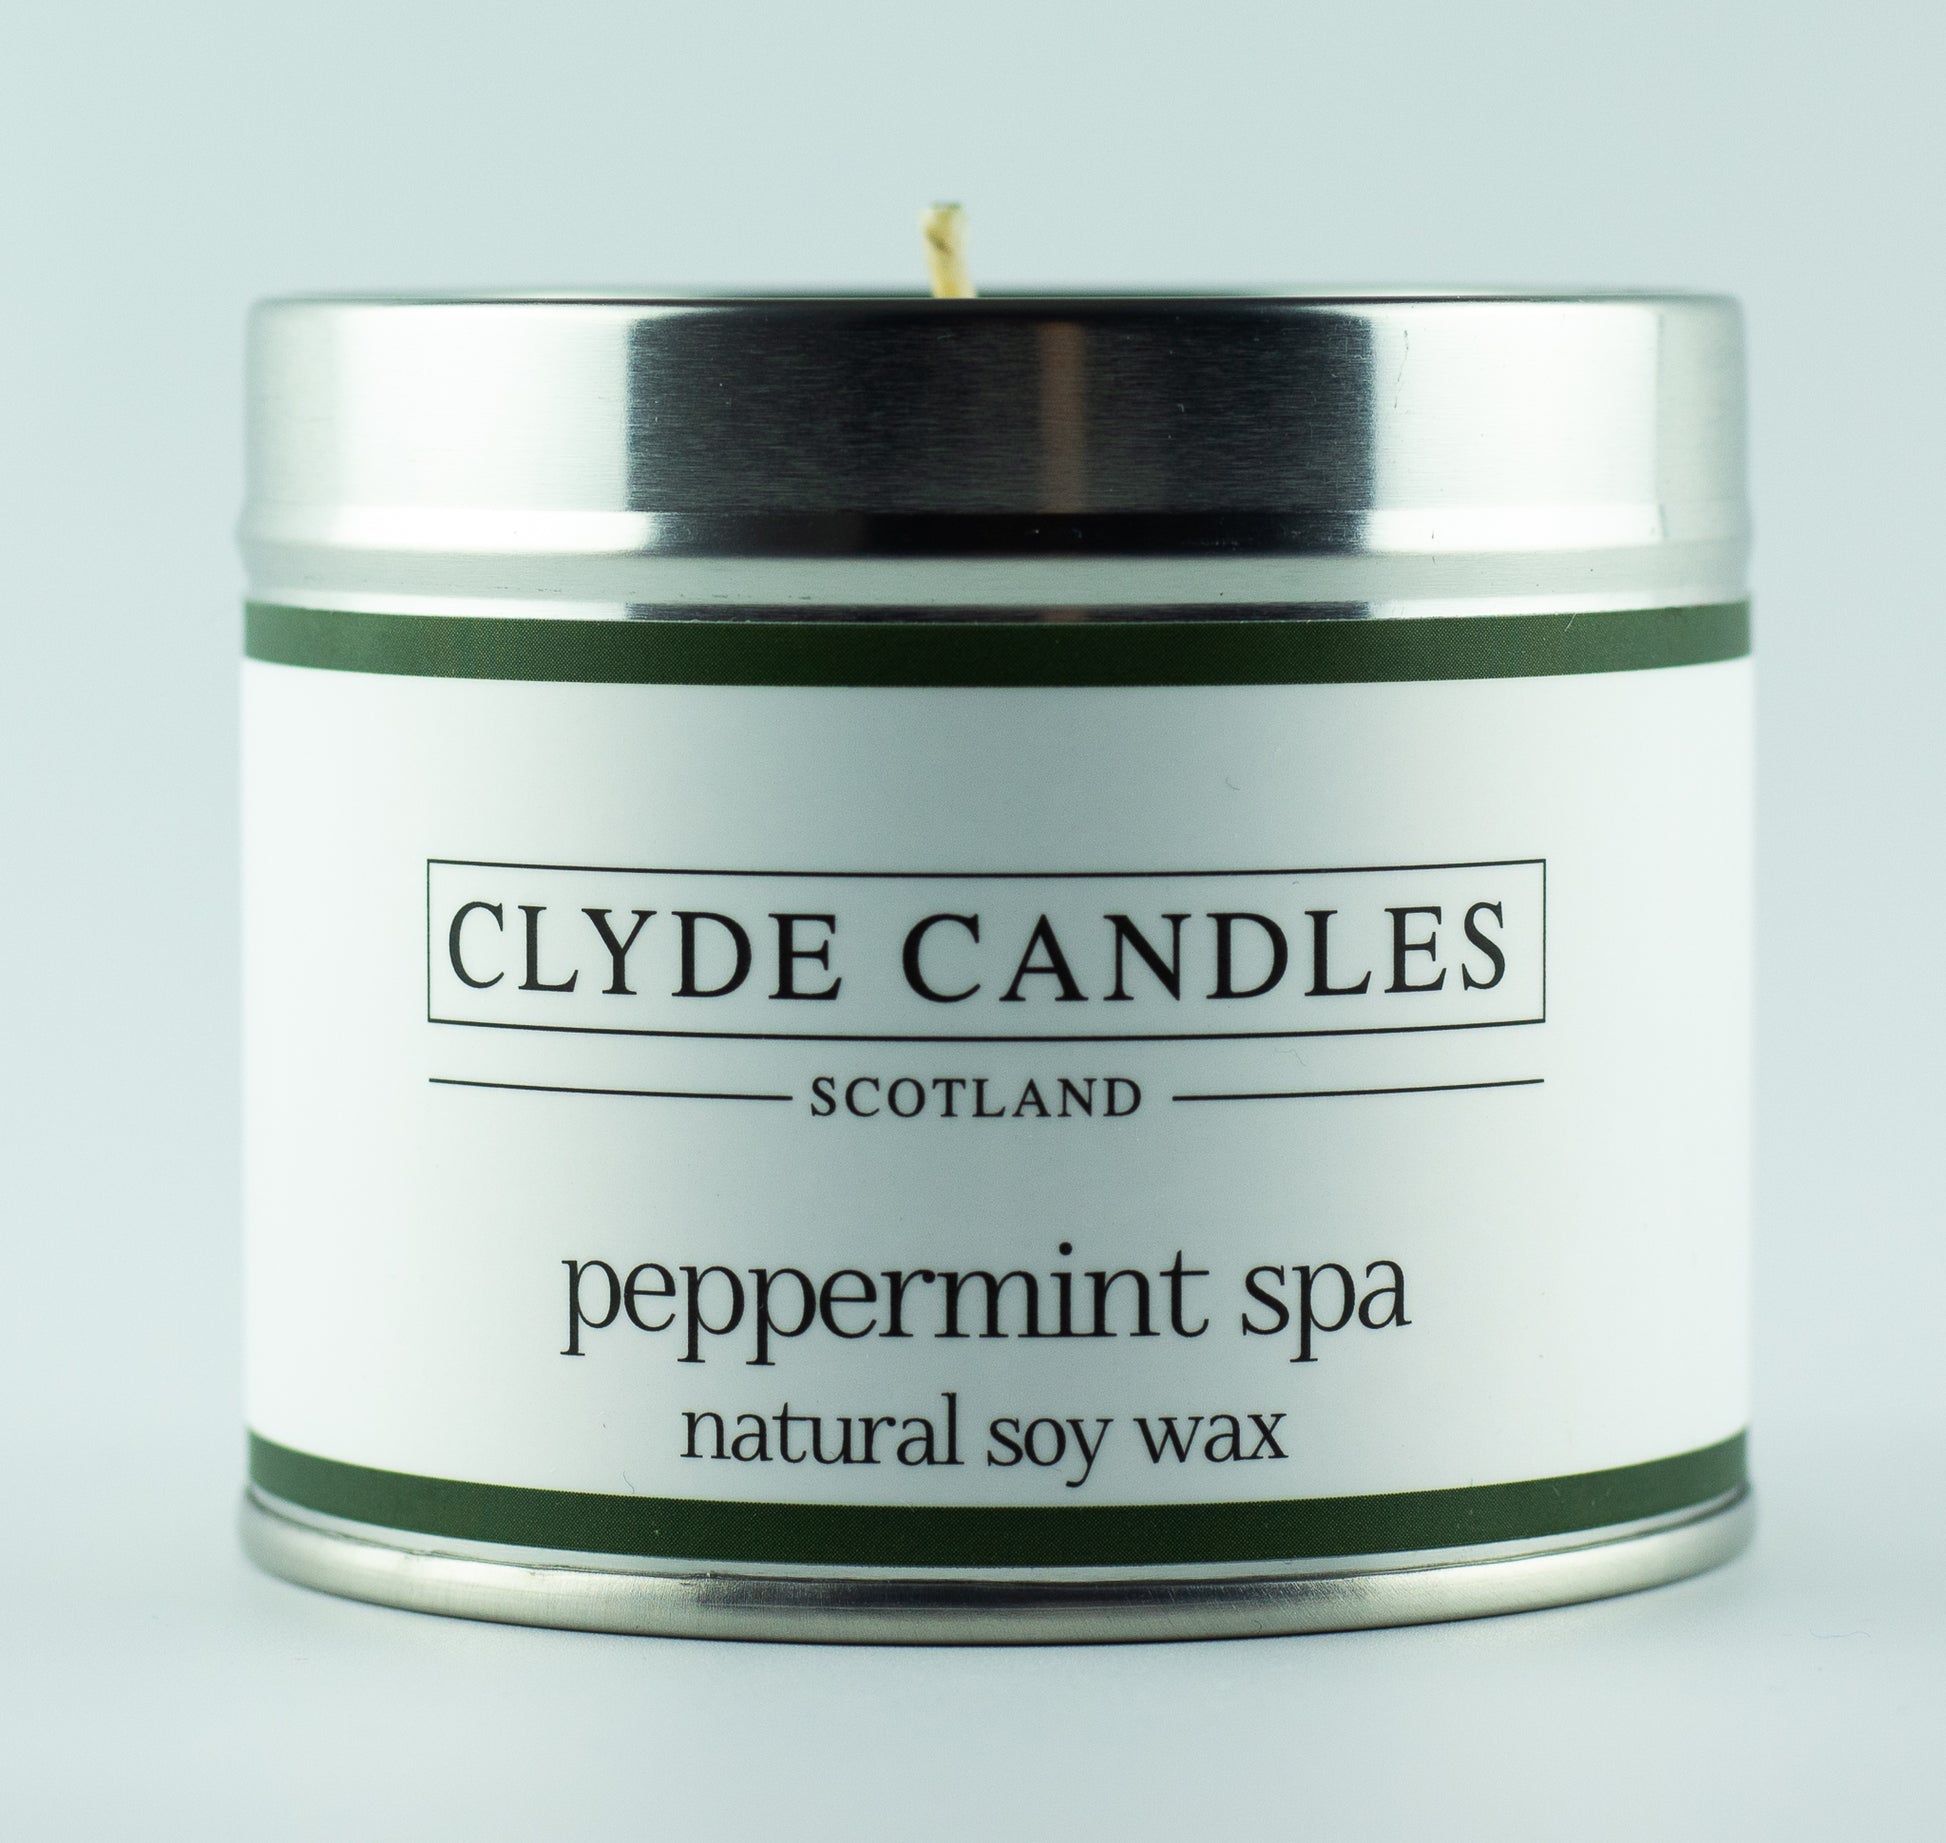 Peppermint Spa Scented Candle Tin Natural Soy wax, Scottish Candles, Clyde Candles